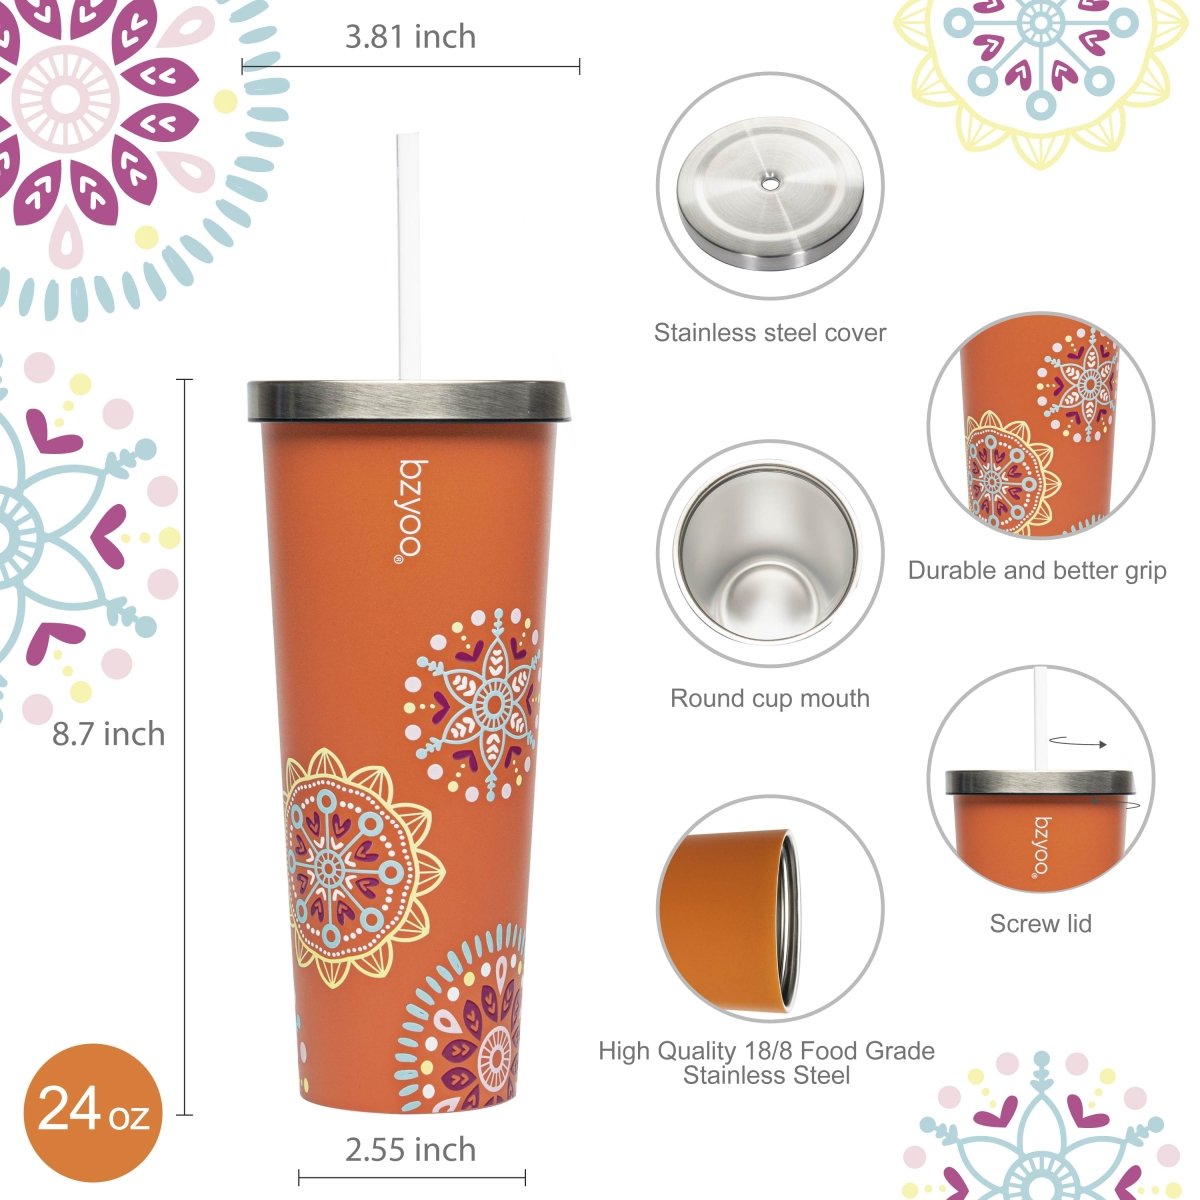 24oz SUP Double Wall Vacuum Insulated Stainless Steel Tumbler w/ Straw Lid - Orange Madallion - bzyoo